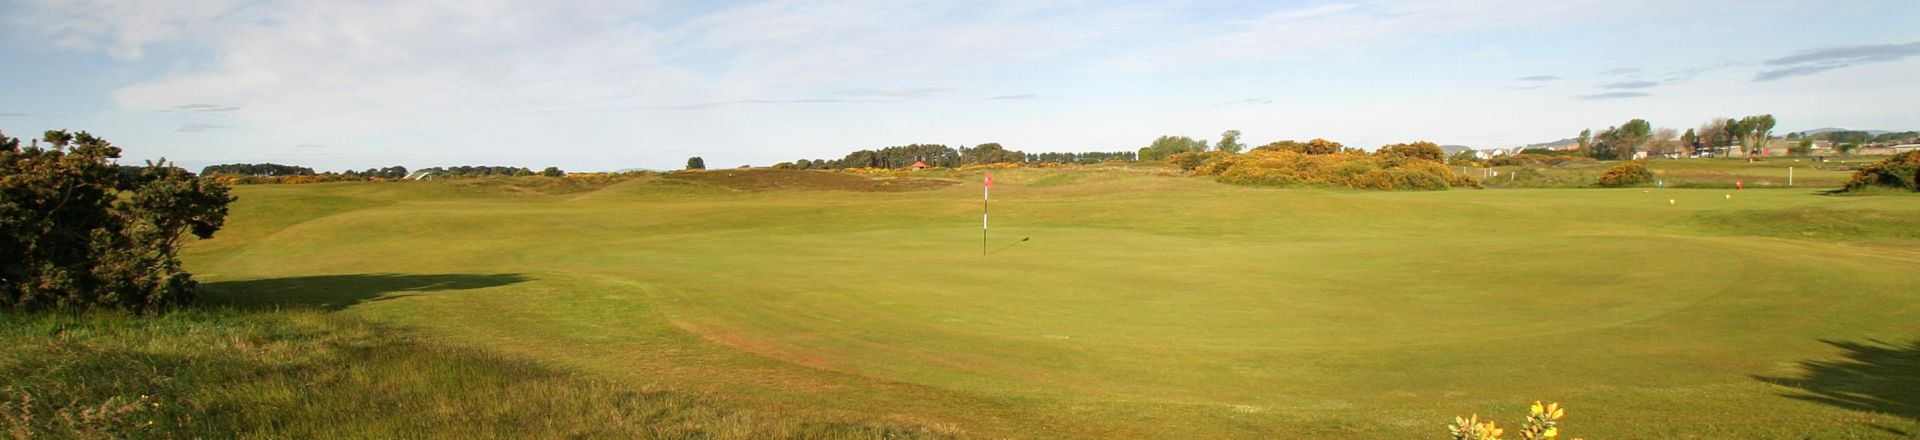 The Carnoustie Burnside Course at Carnoustie Golf Links